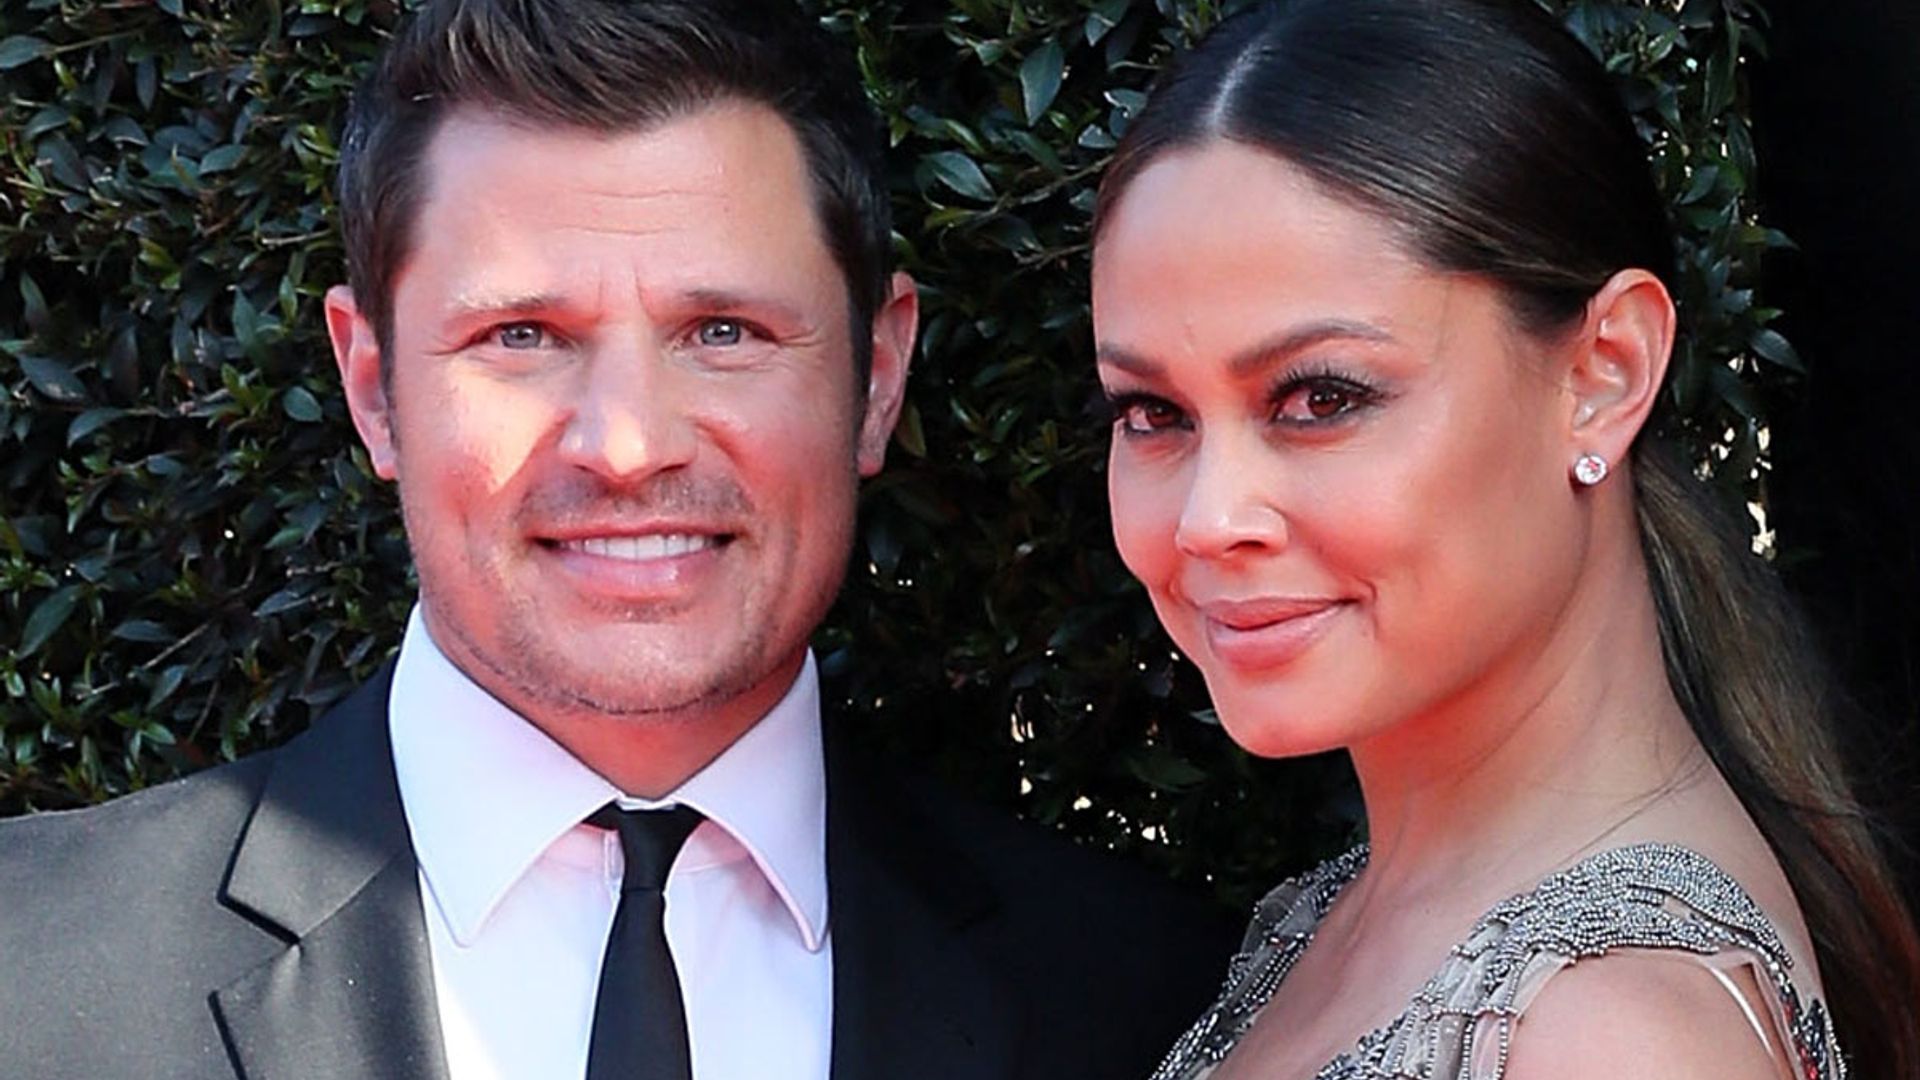 Nick Lachey and Vanessa Lachey's Relationship, In Their Own Words